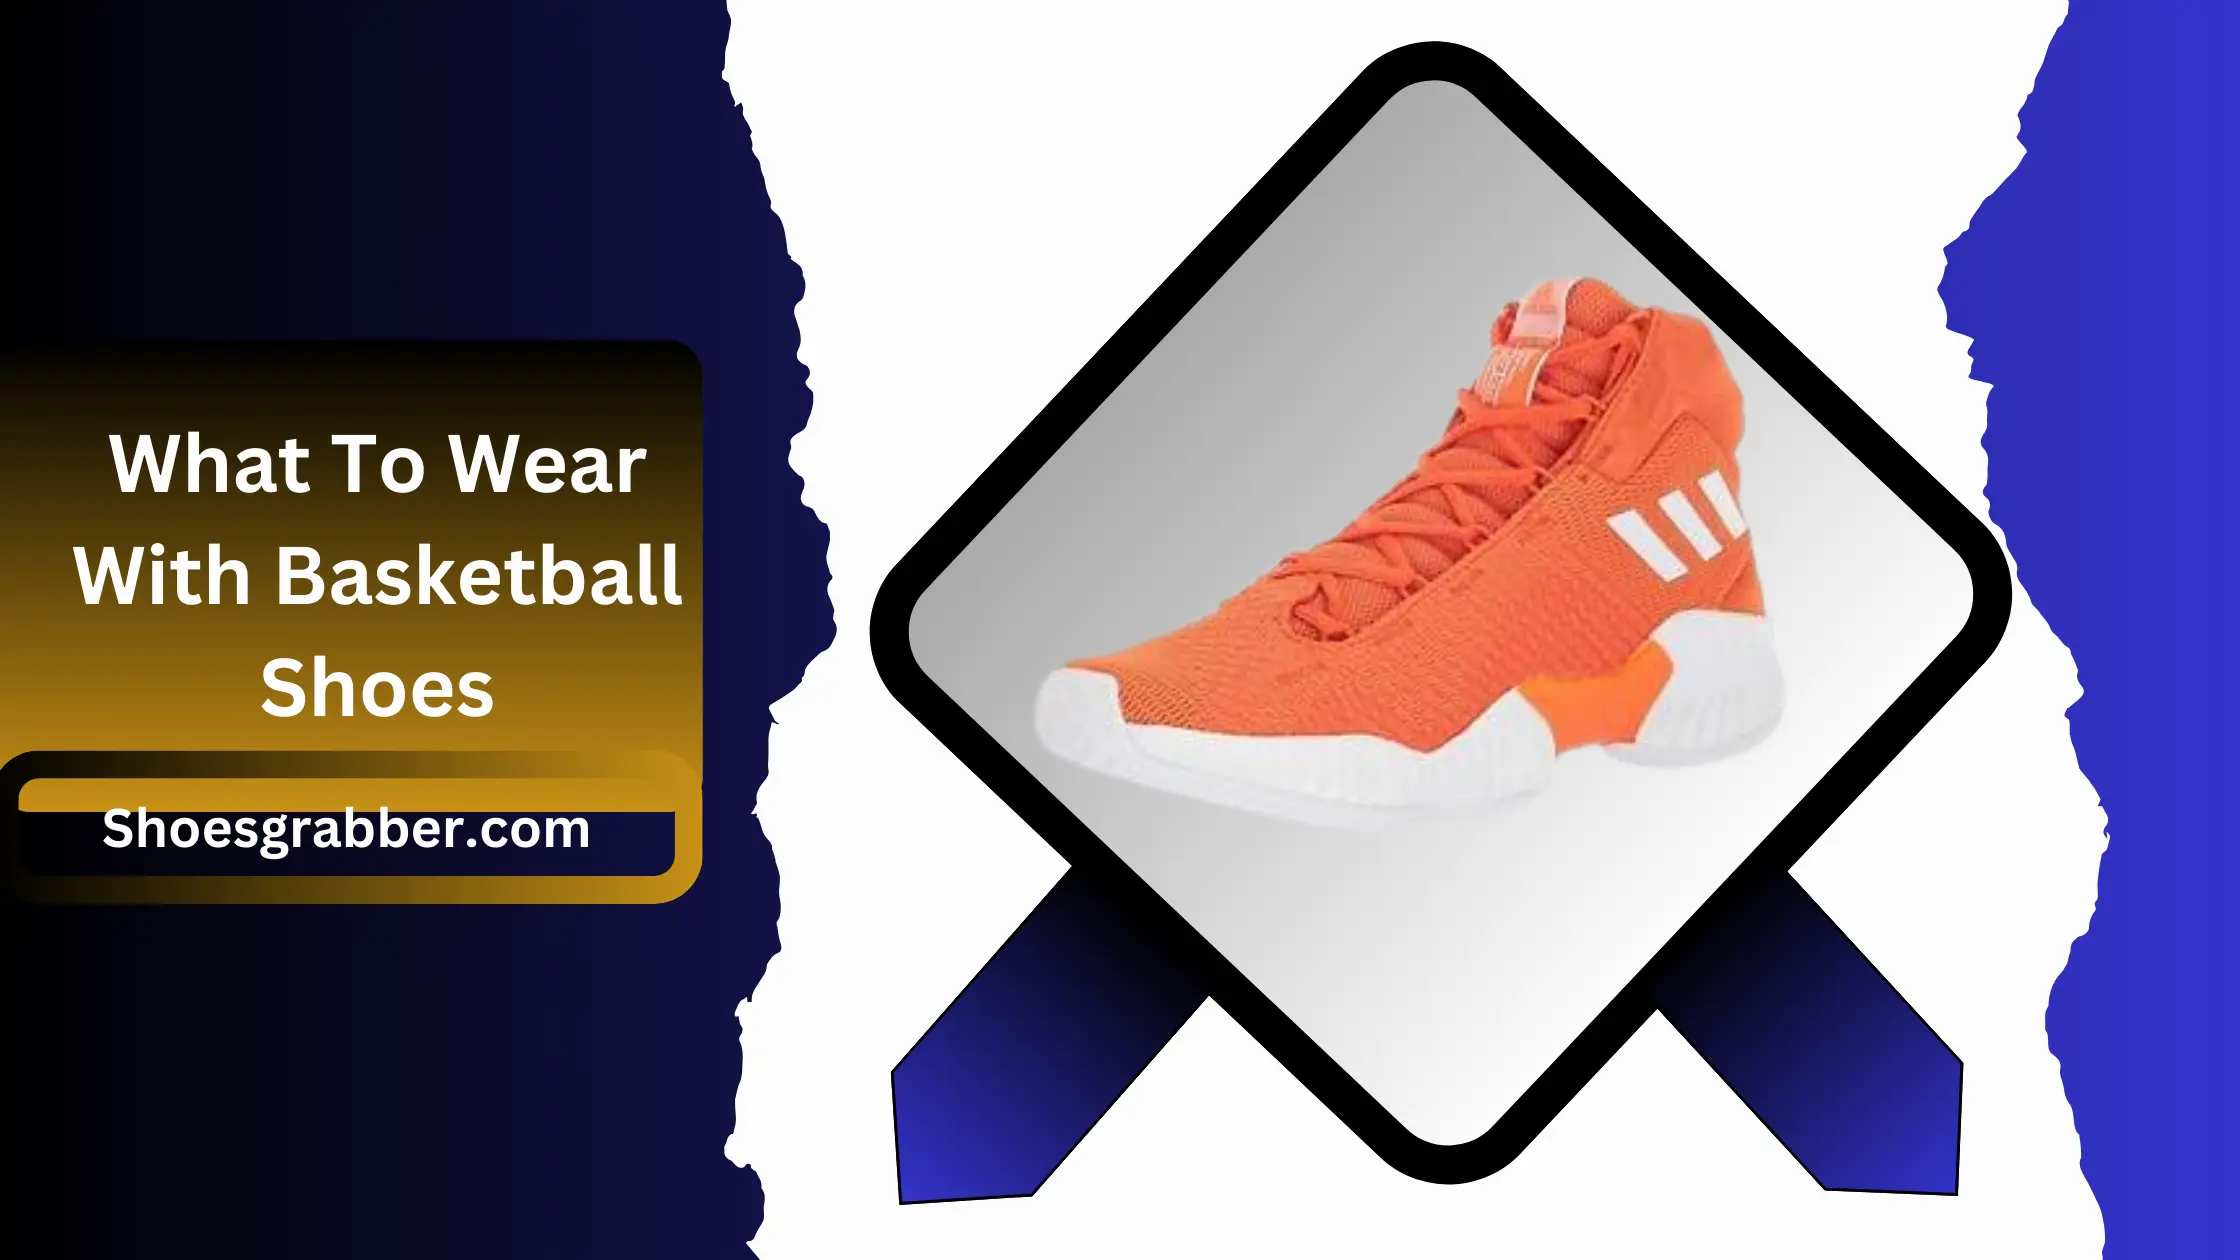 What To Wear With Basketball Shoes - Combining Style With Comfort